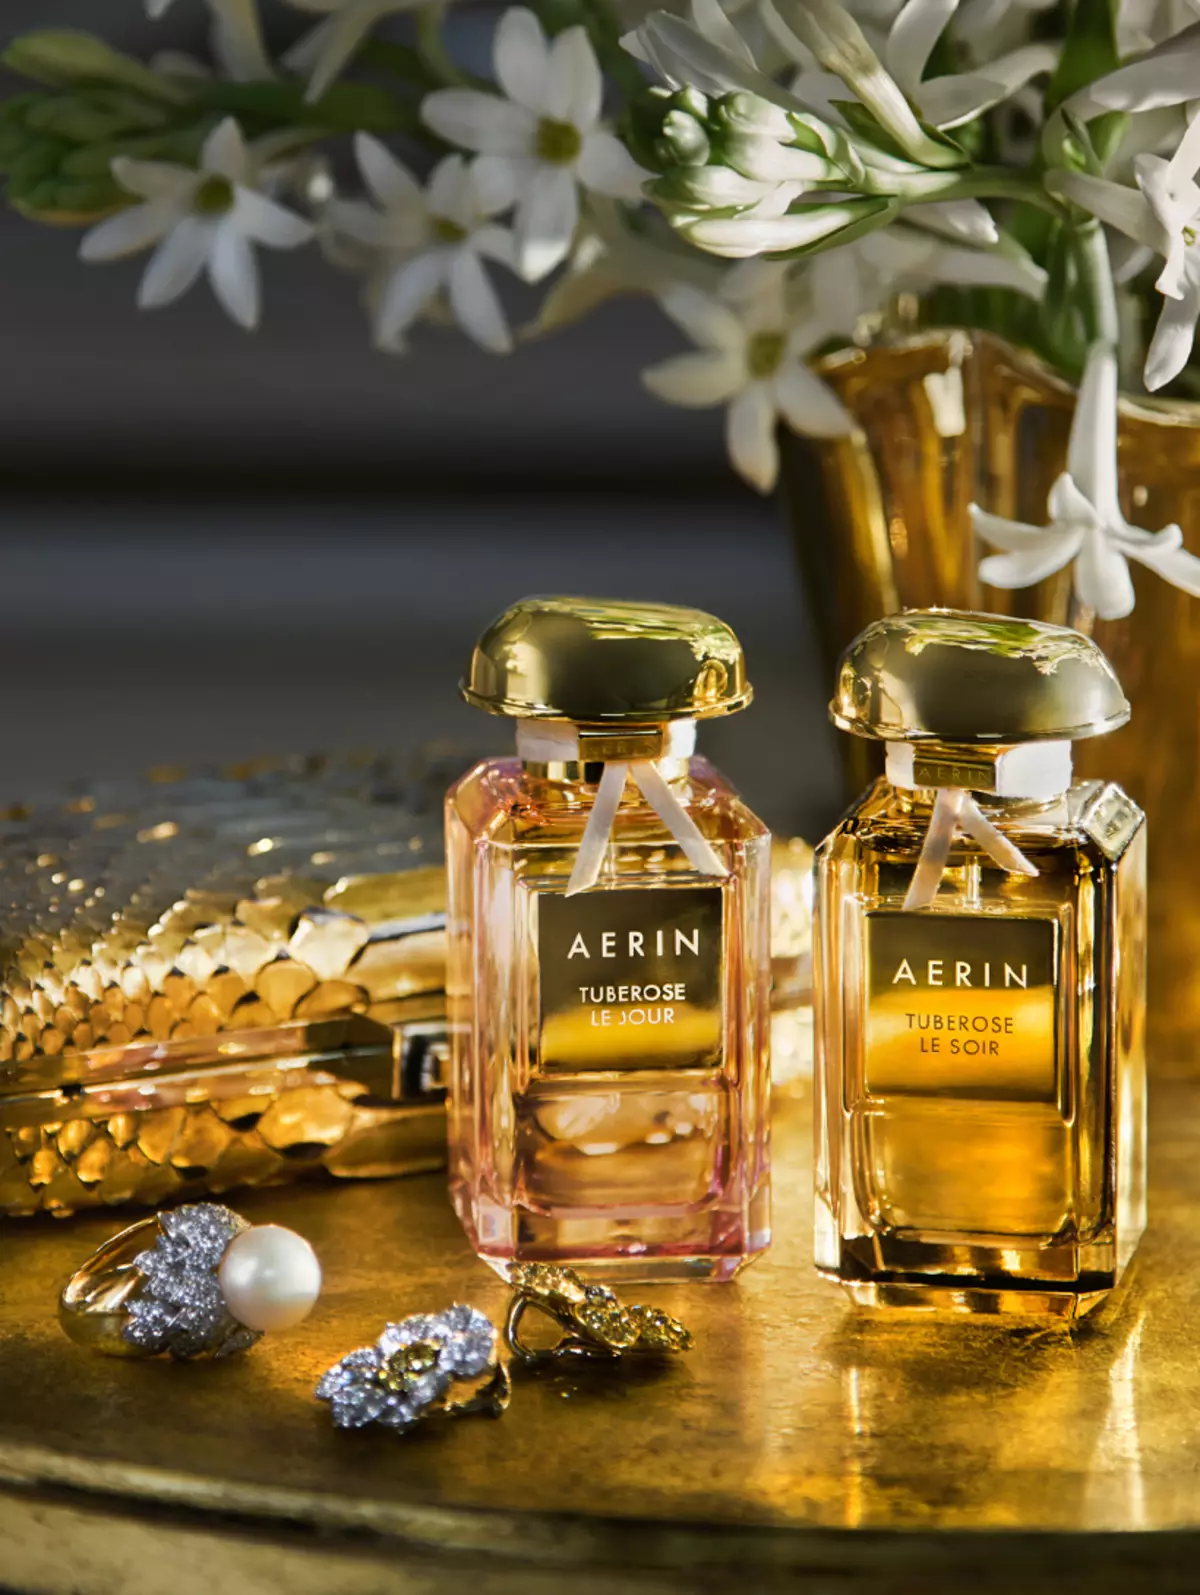 Perfumes Aerin Lauder: Perfume Amber Musk, Tangier Vanille and other perfumes, selection criteria 25206_14